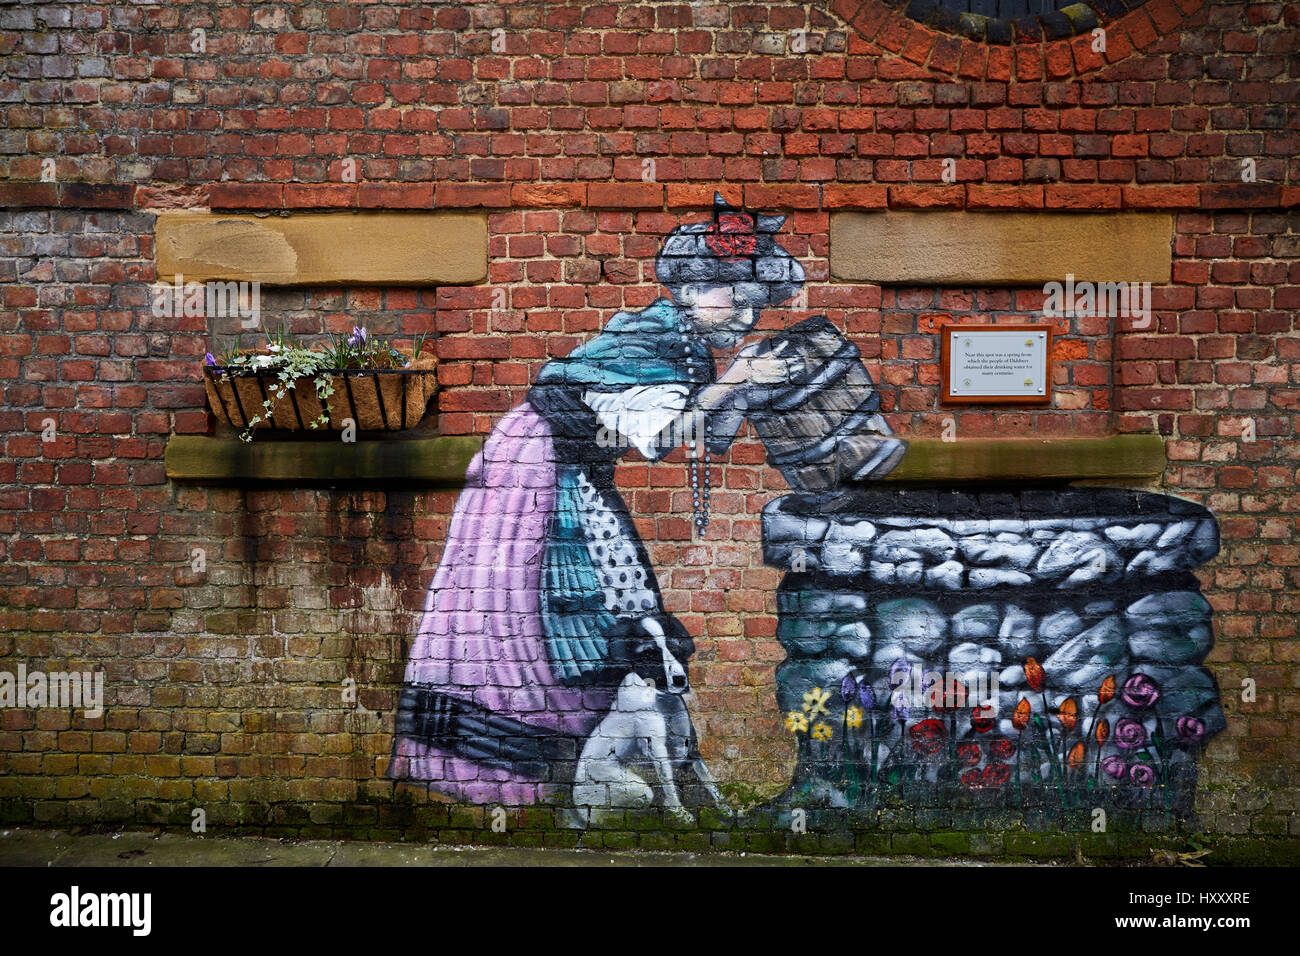 Graffiti art, strut mural, at the site of a water well spa Stenner Lane in Didsbury,  Manchester, England, UK, Stock Photo